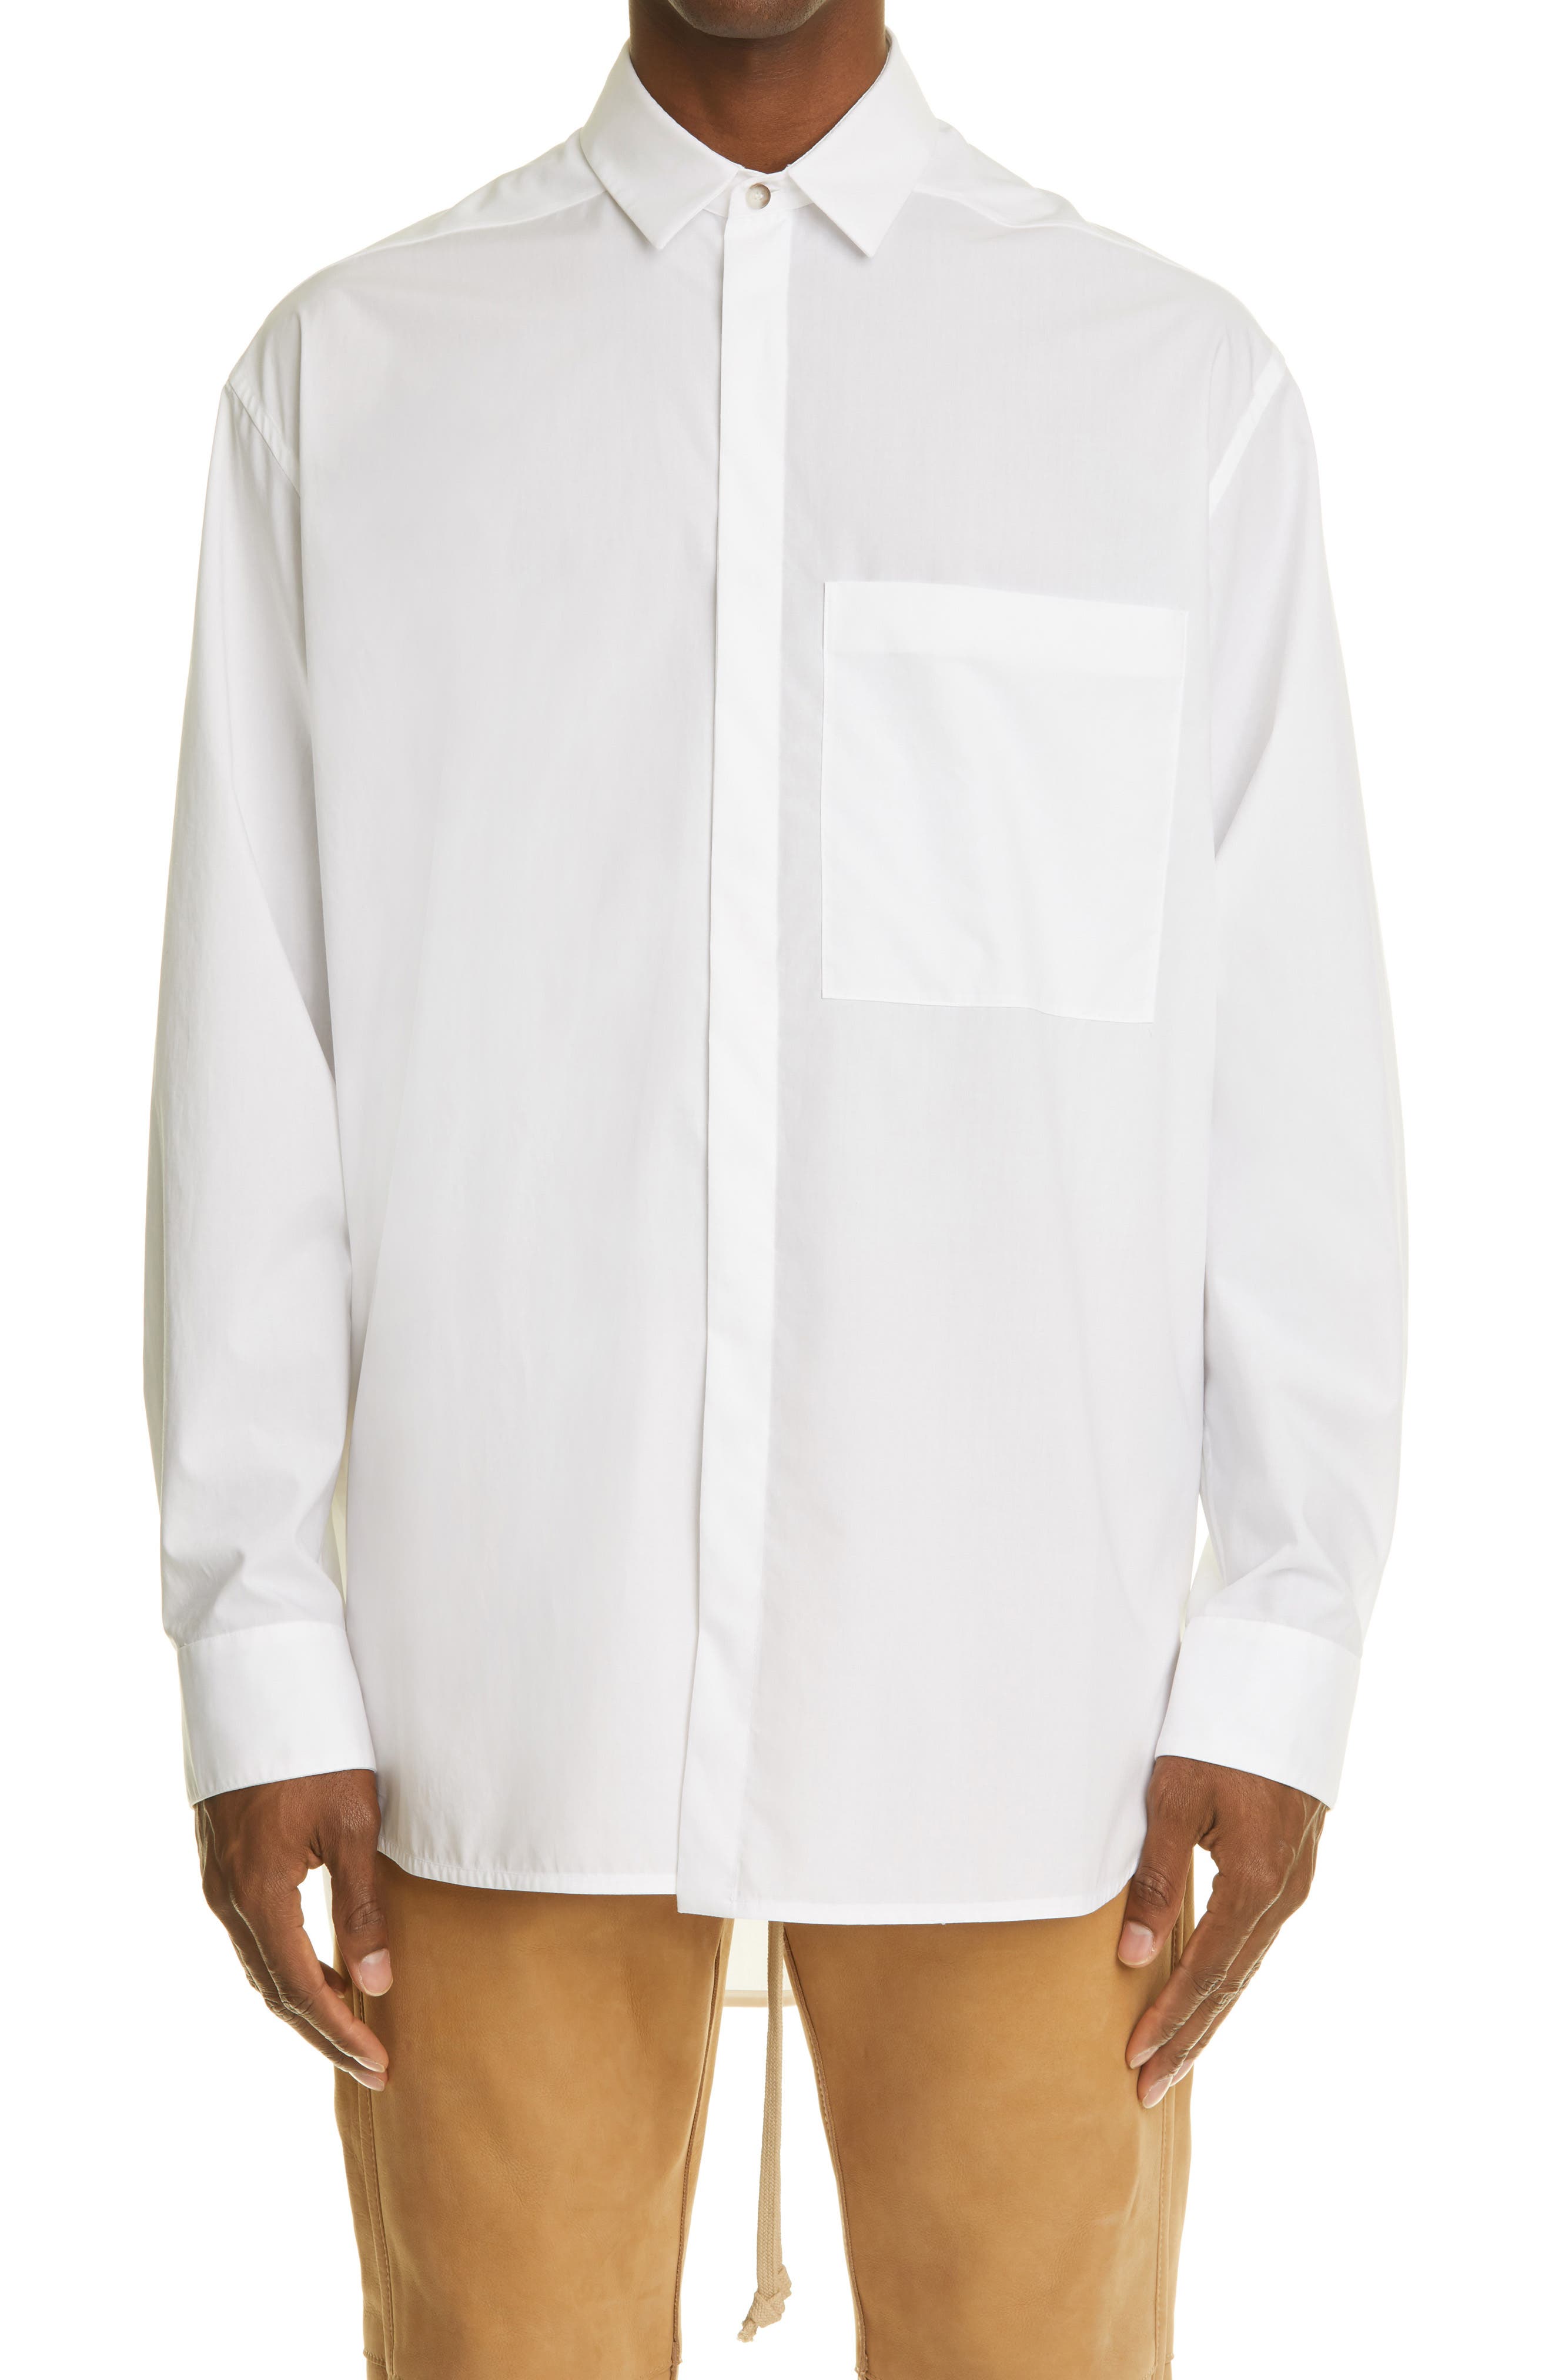 Fear of God Men's Easy Button-Up Shirt in White at Nordstrom, Size 38 Us